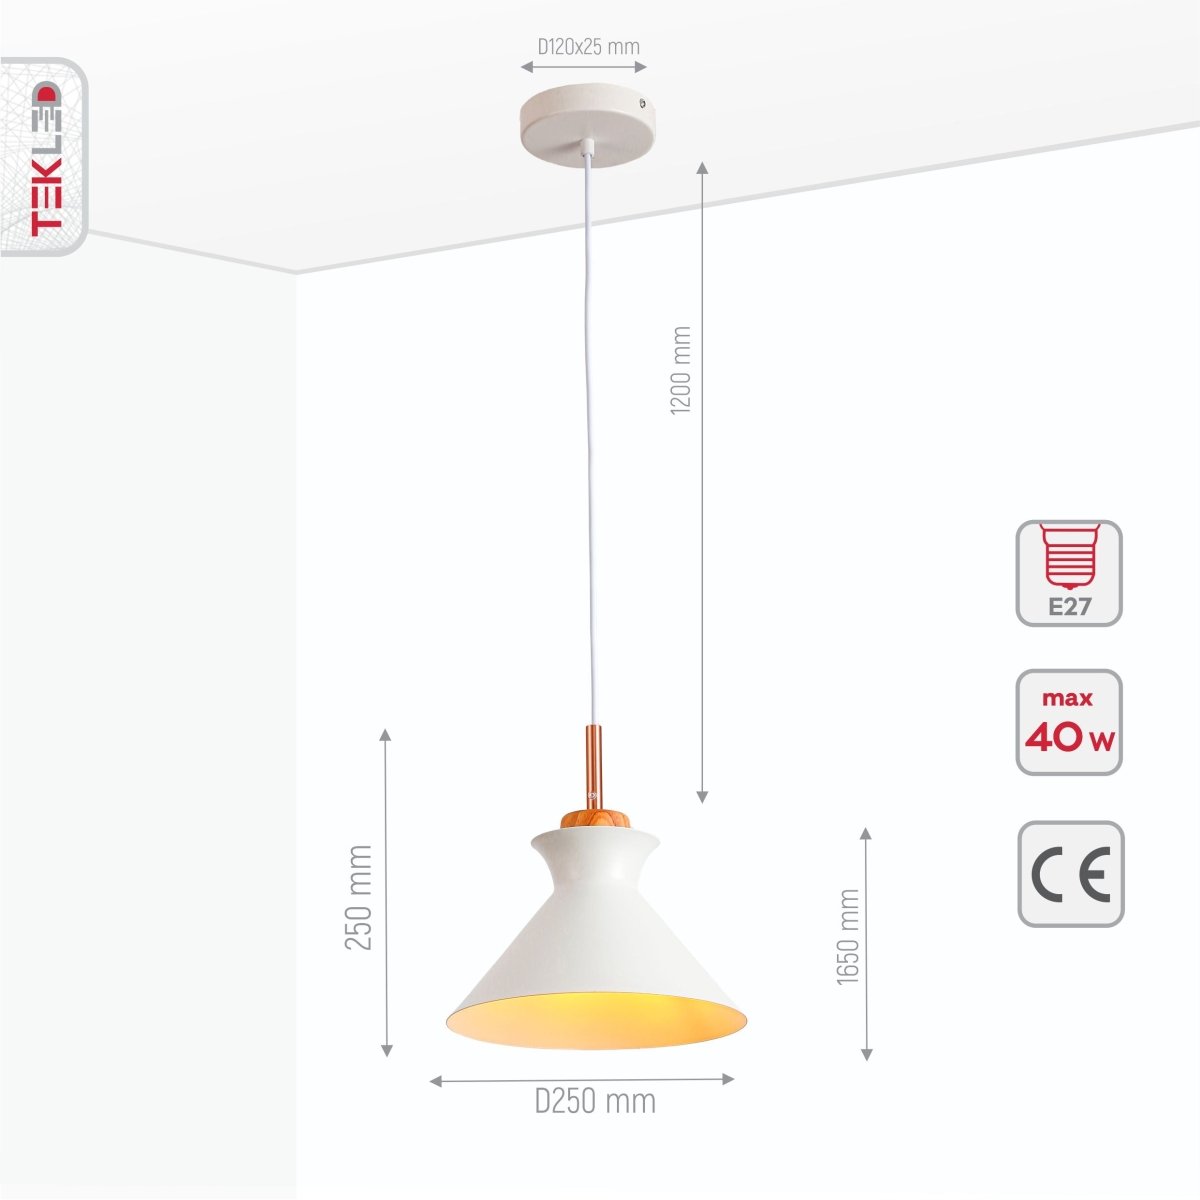 Product dimensions of white metal wood neck pendant light small e27